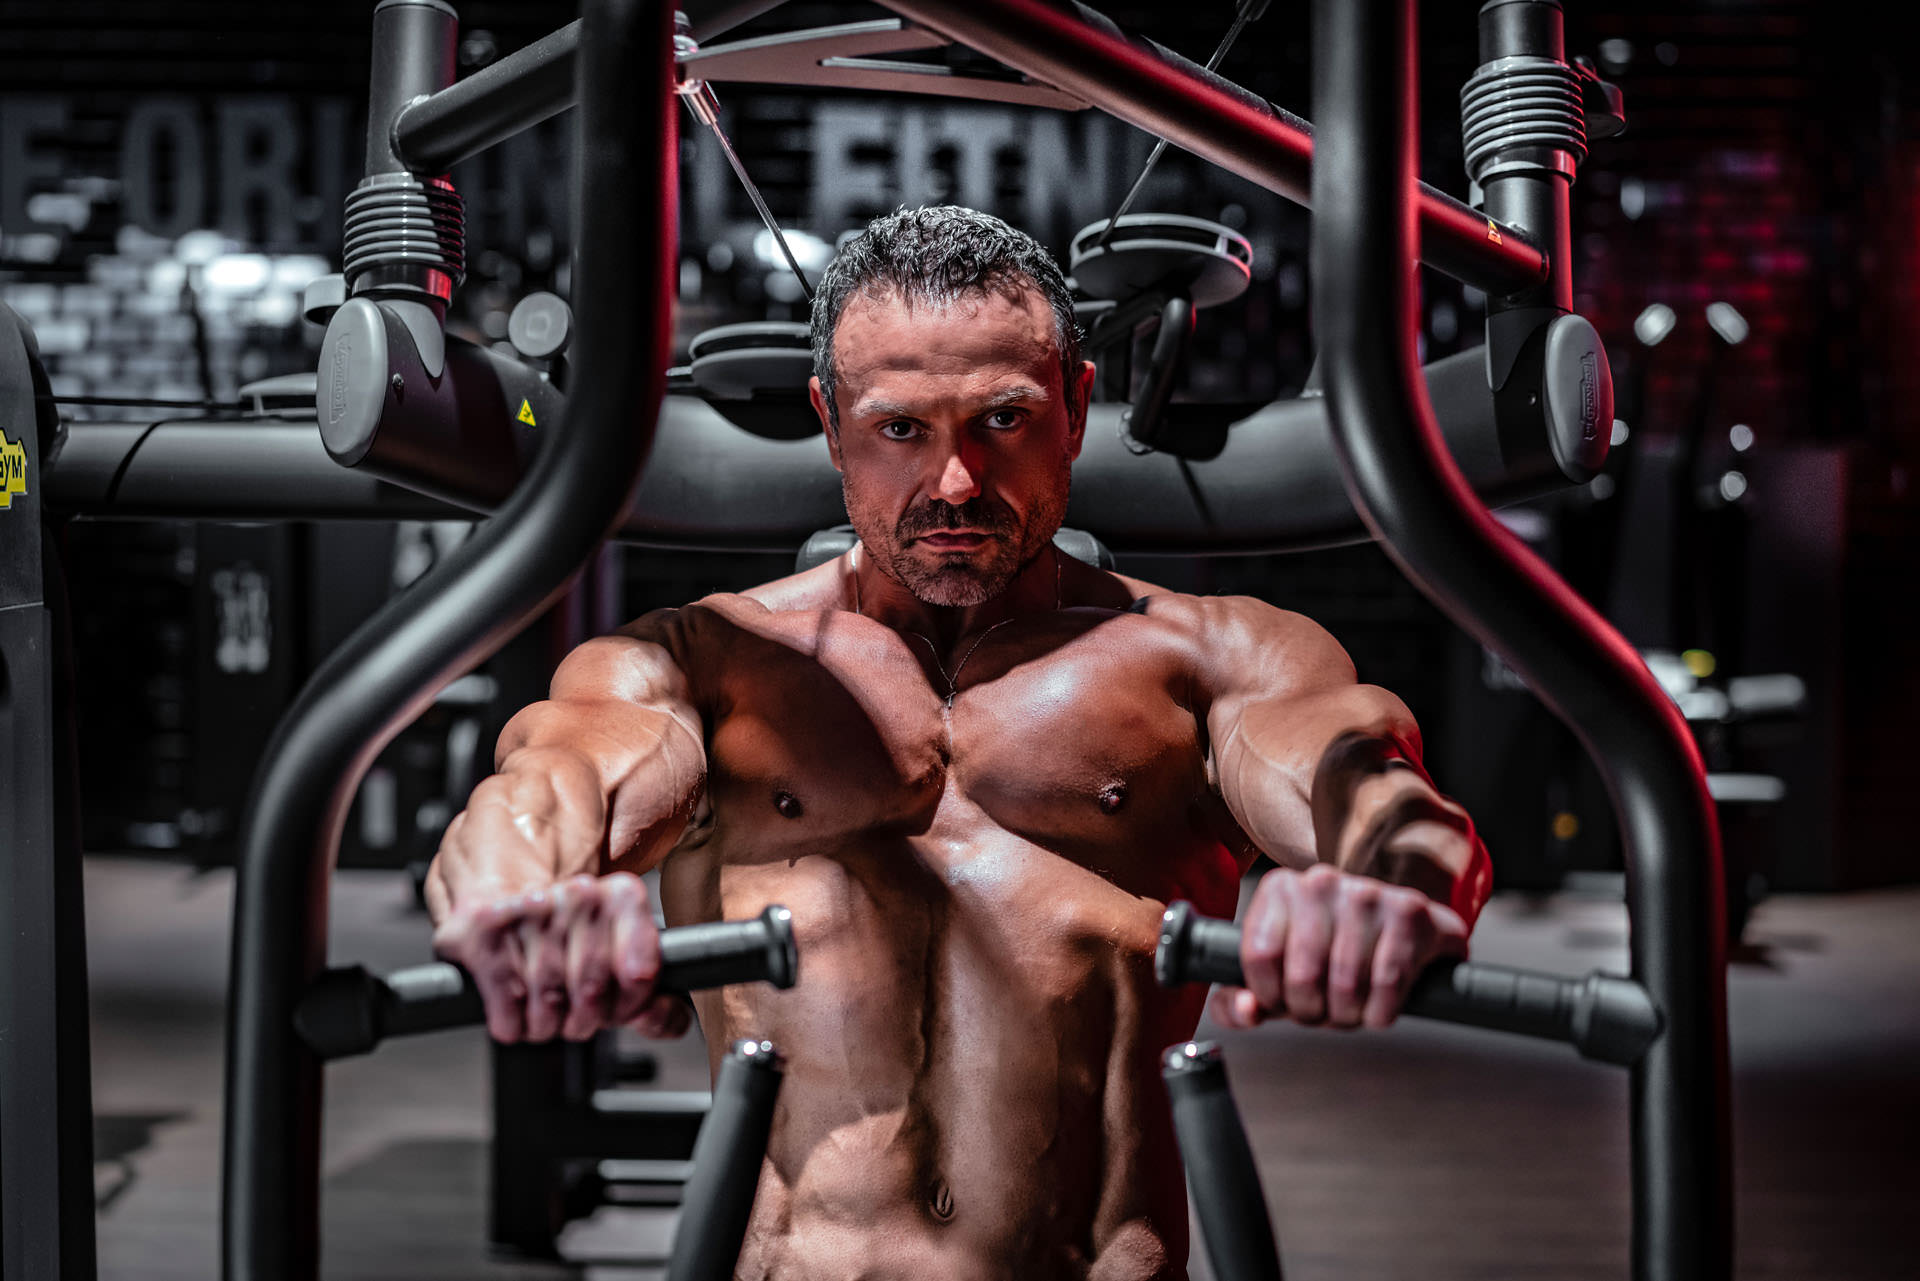 2019-03-04 - Enzo - Muscle & Fitness - 06678 - 1920px